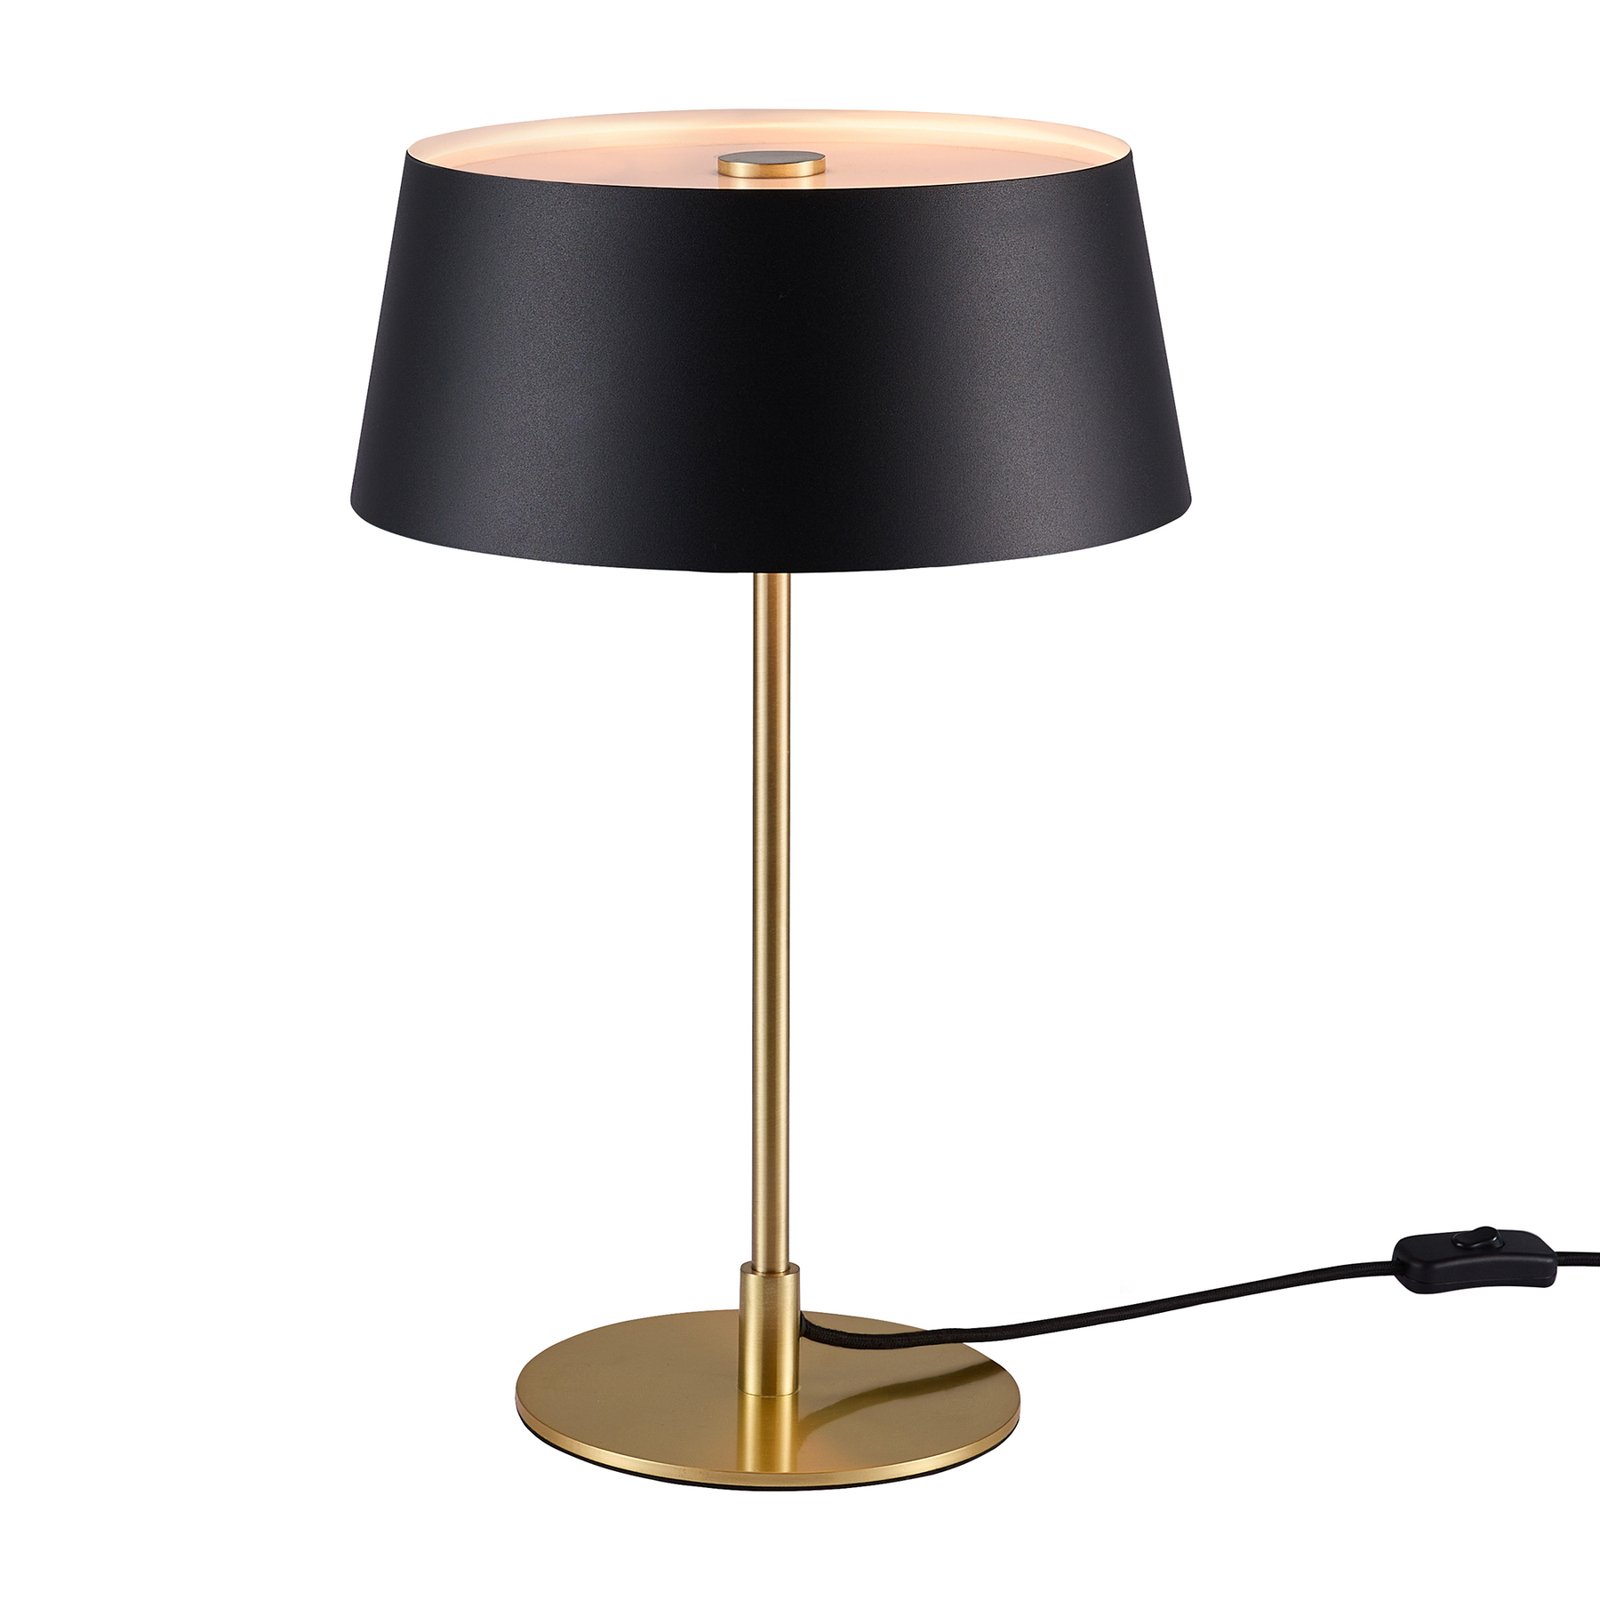 Clasi table lamp in black/gold with diffusers